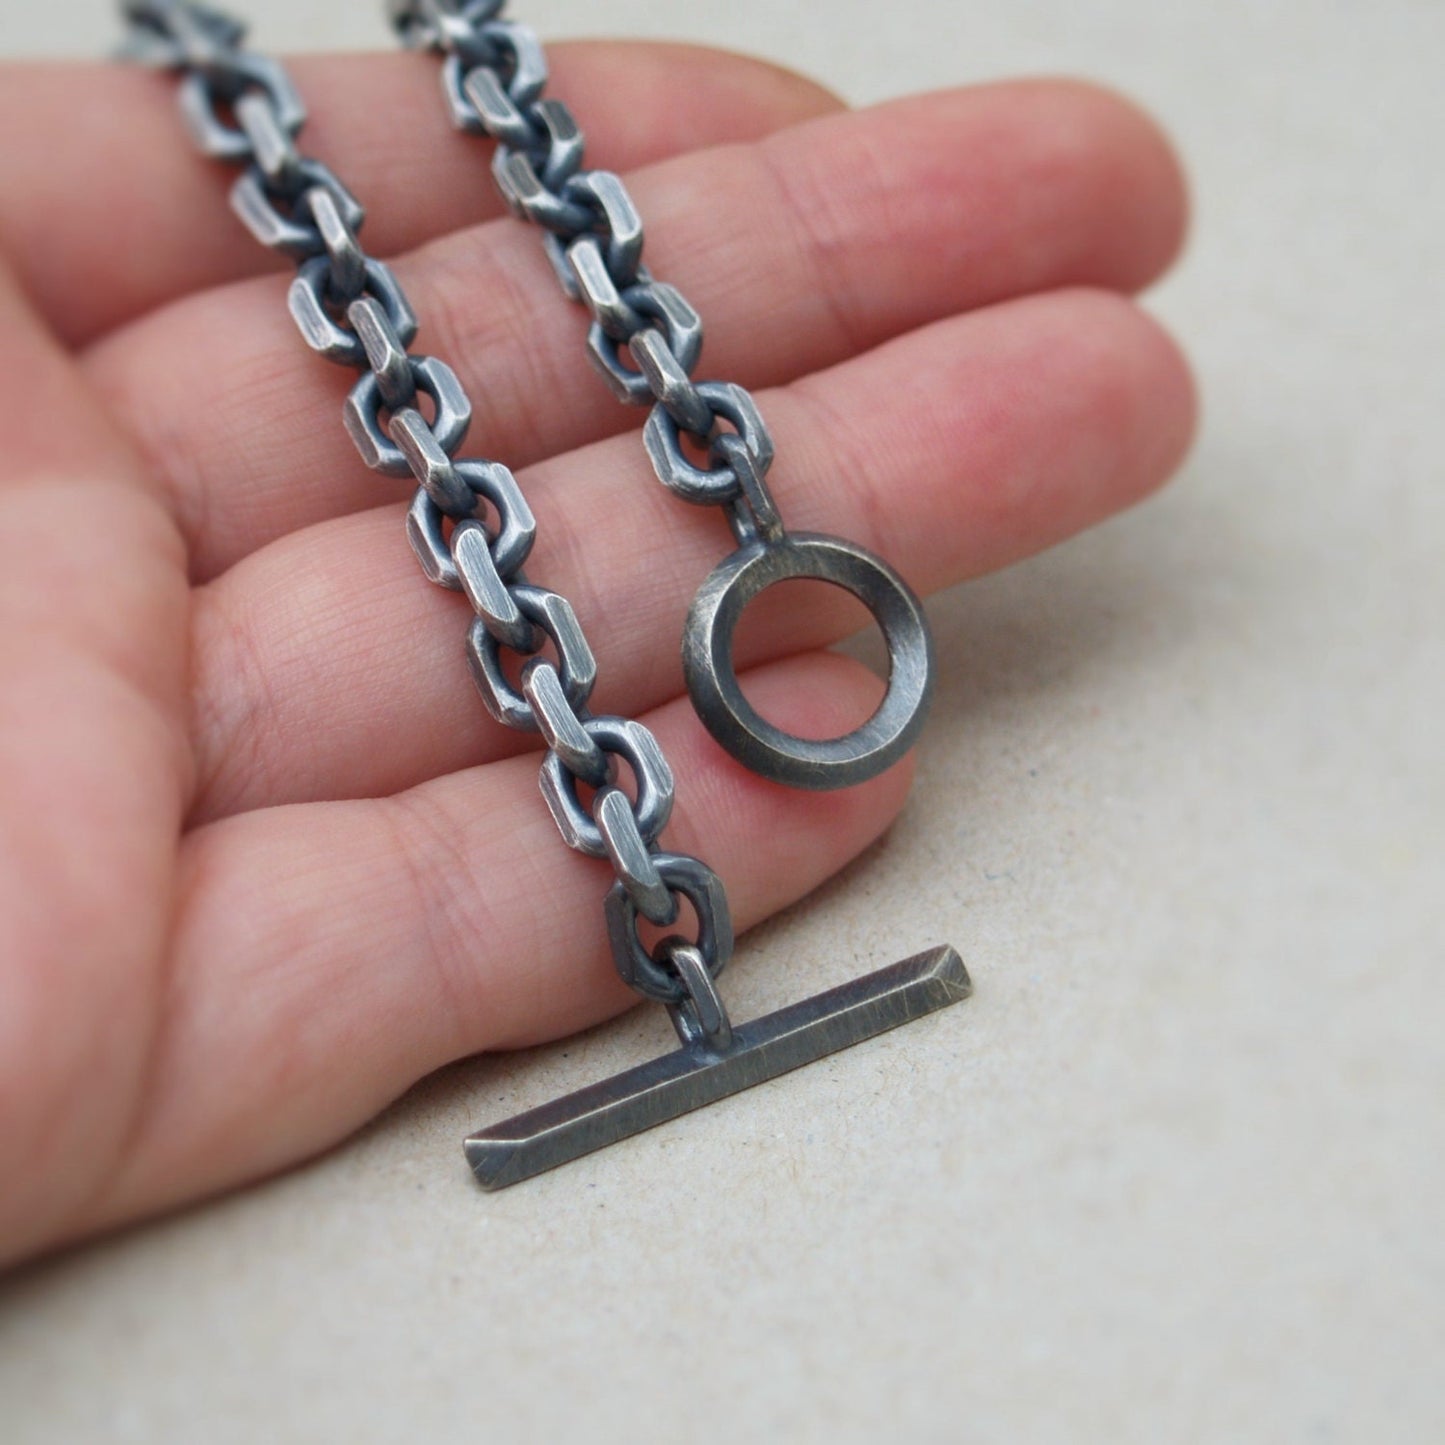 Handmade to order - Oxidised or polished solid silver 6.6mm wide diamond cut trace chain bracelet with a unique T-bar design